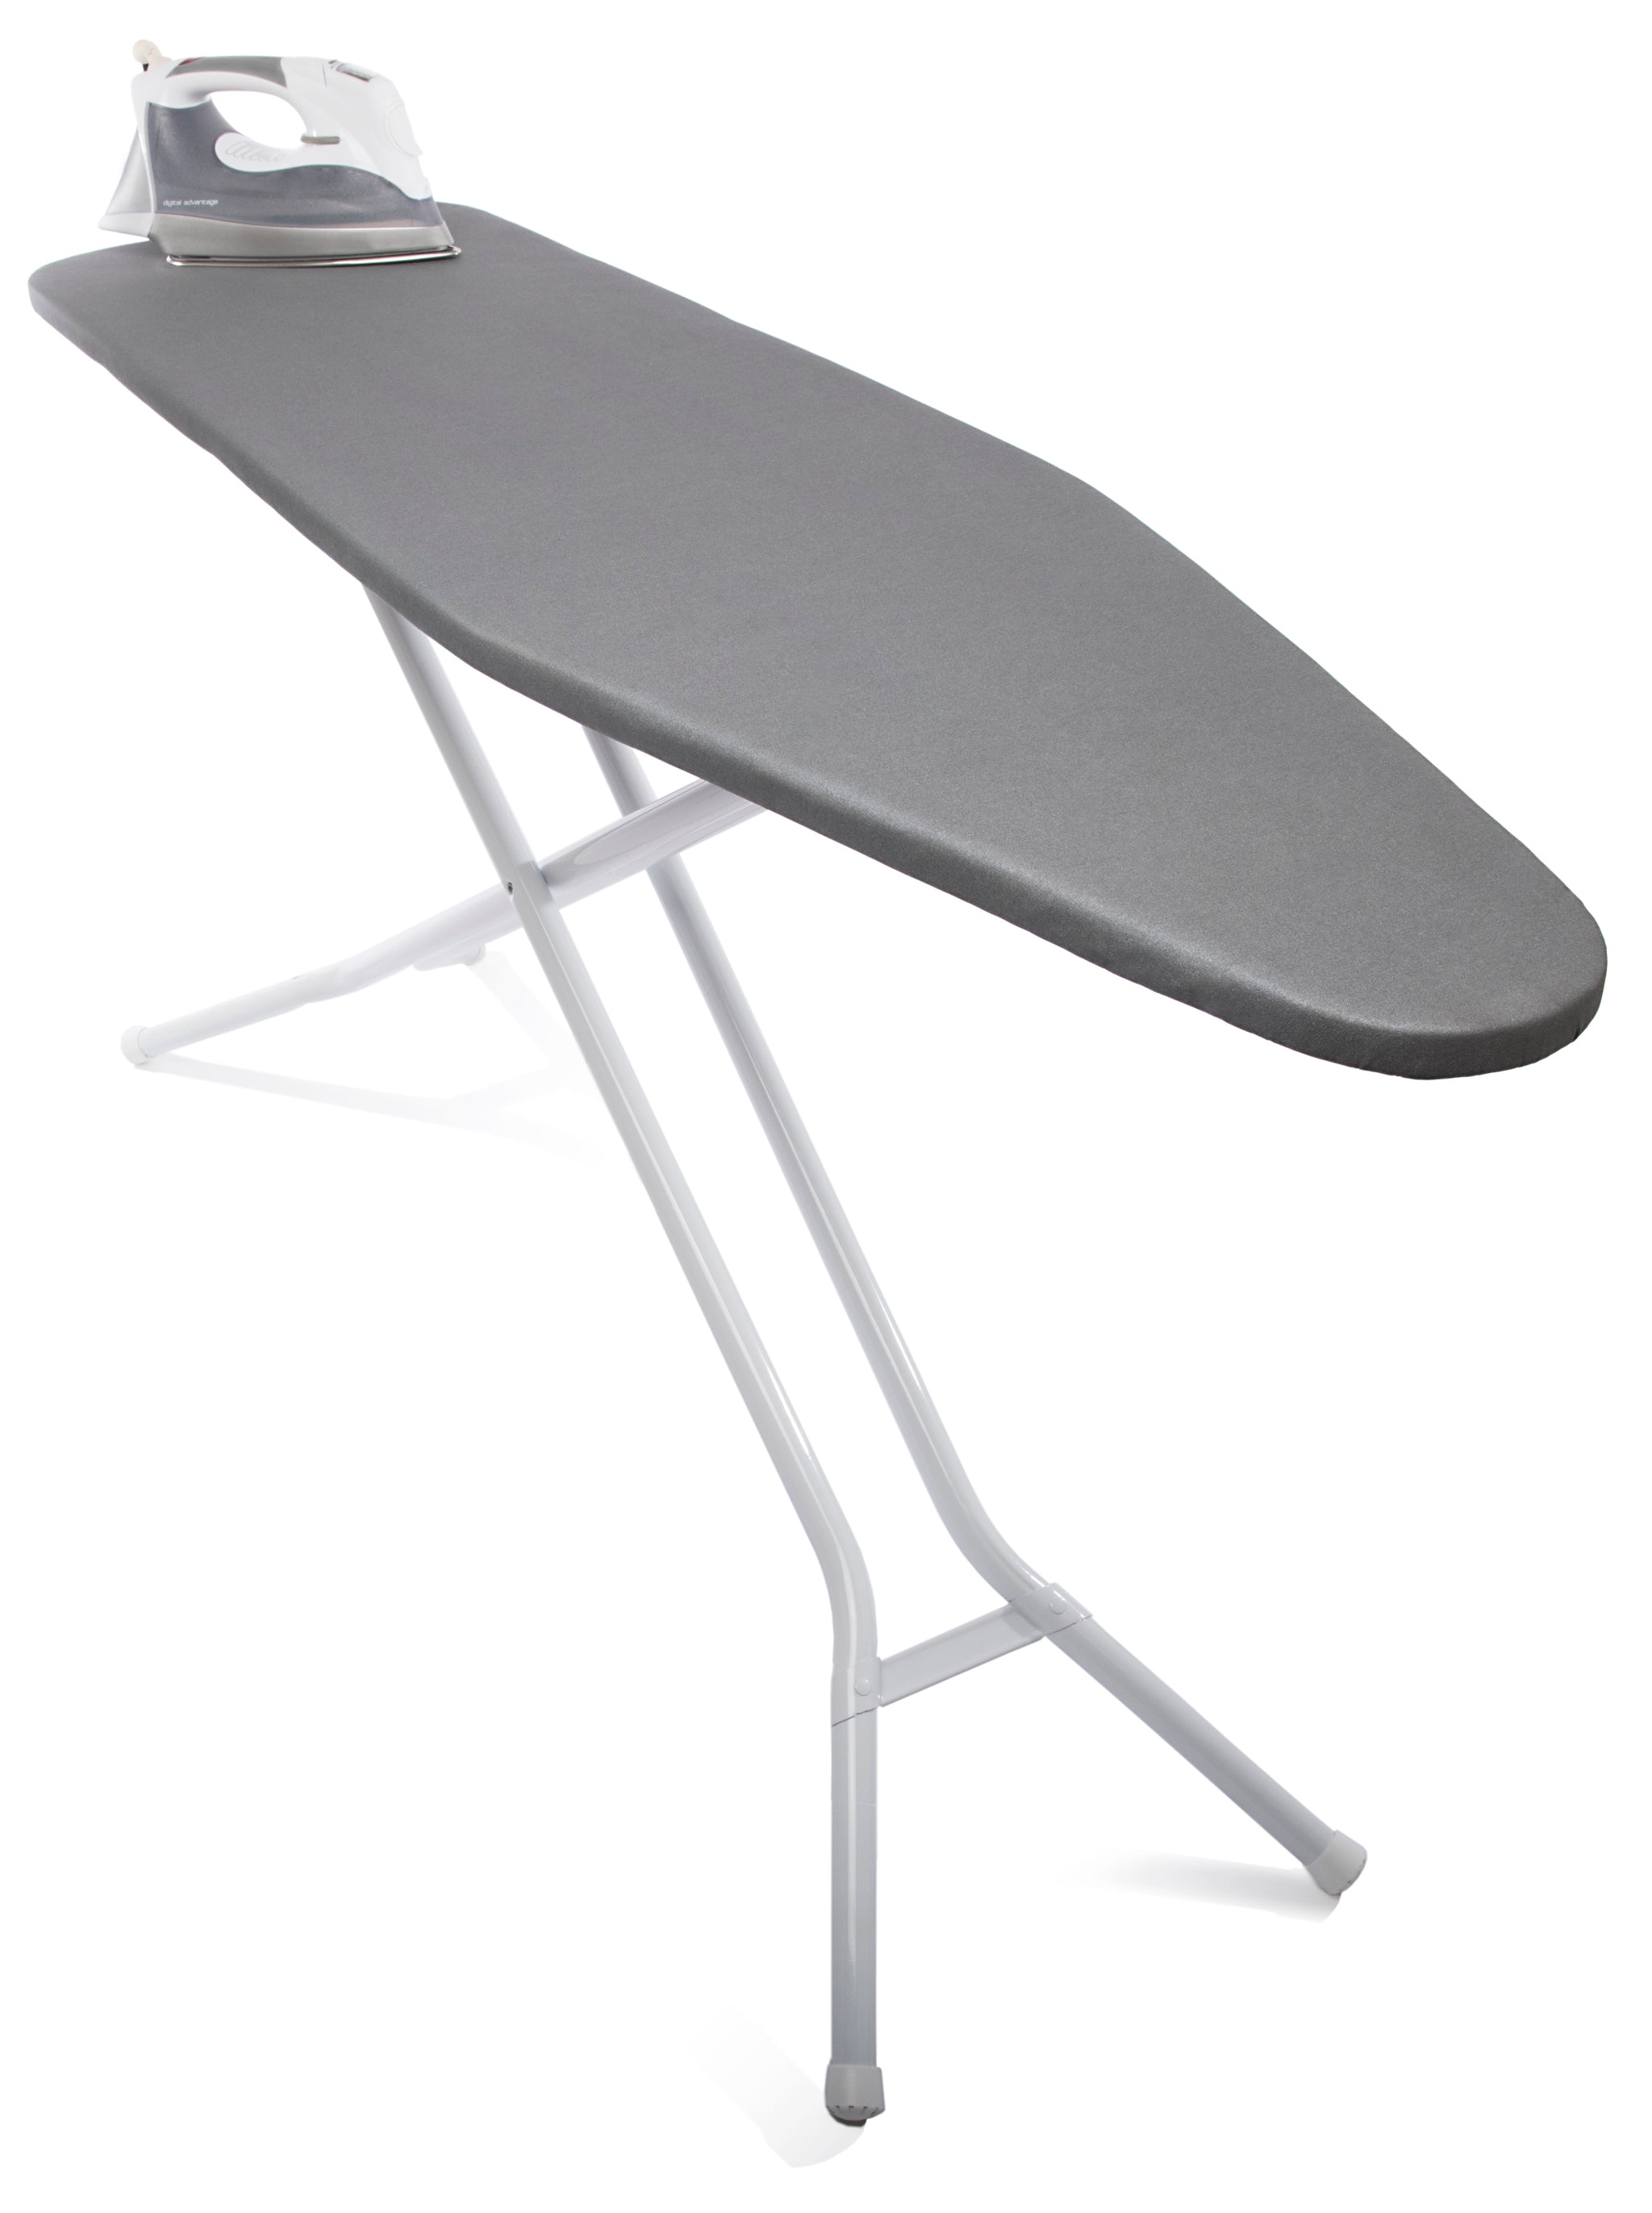  Epica Ironing Board Cover and Pad - Standard Size 15x54 Padded Ironing  Board Covers, Heat Reflective Coating, Scorch & Stain Resistant Iron Board  Cover with Padding Grey & White Lattice 